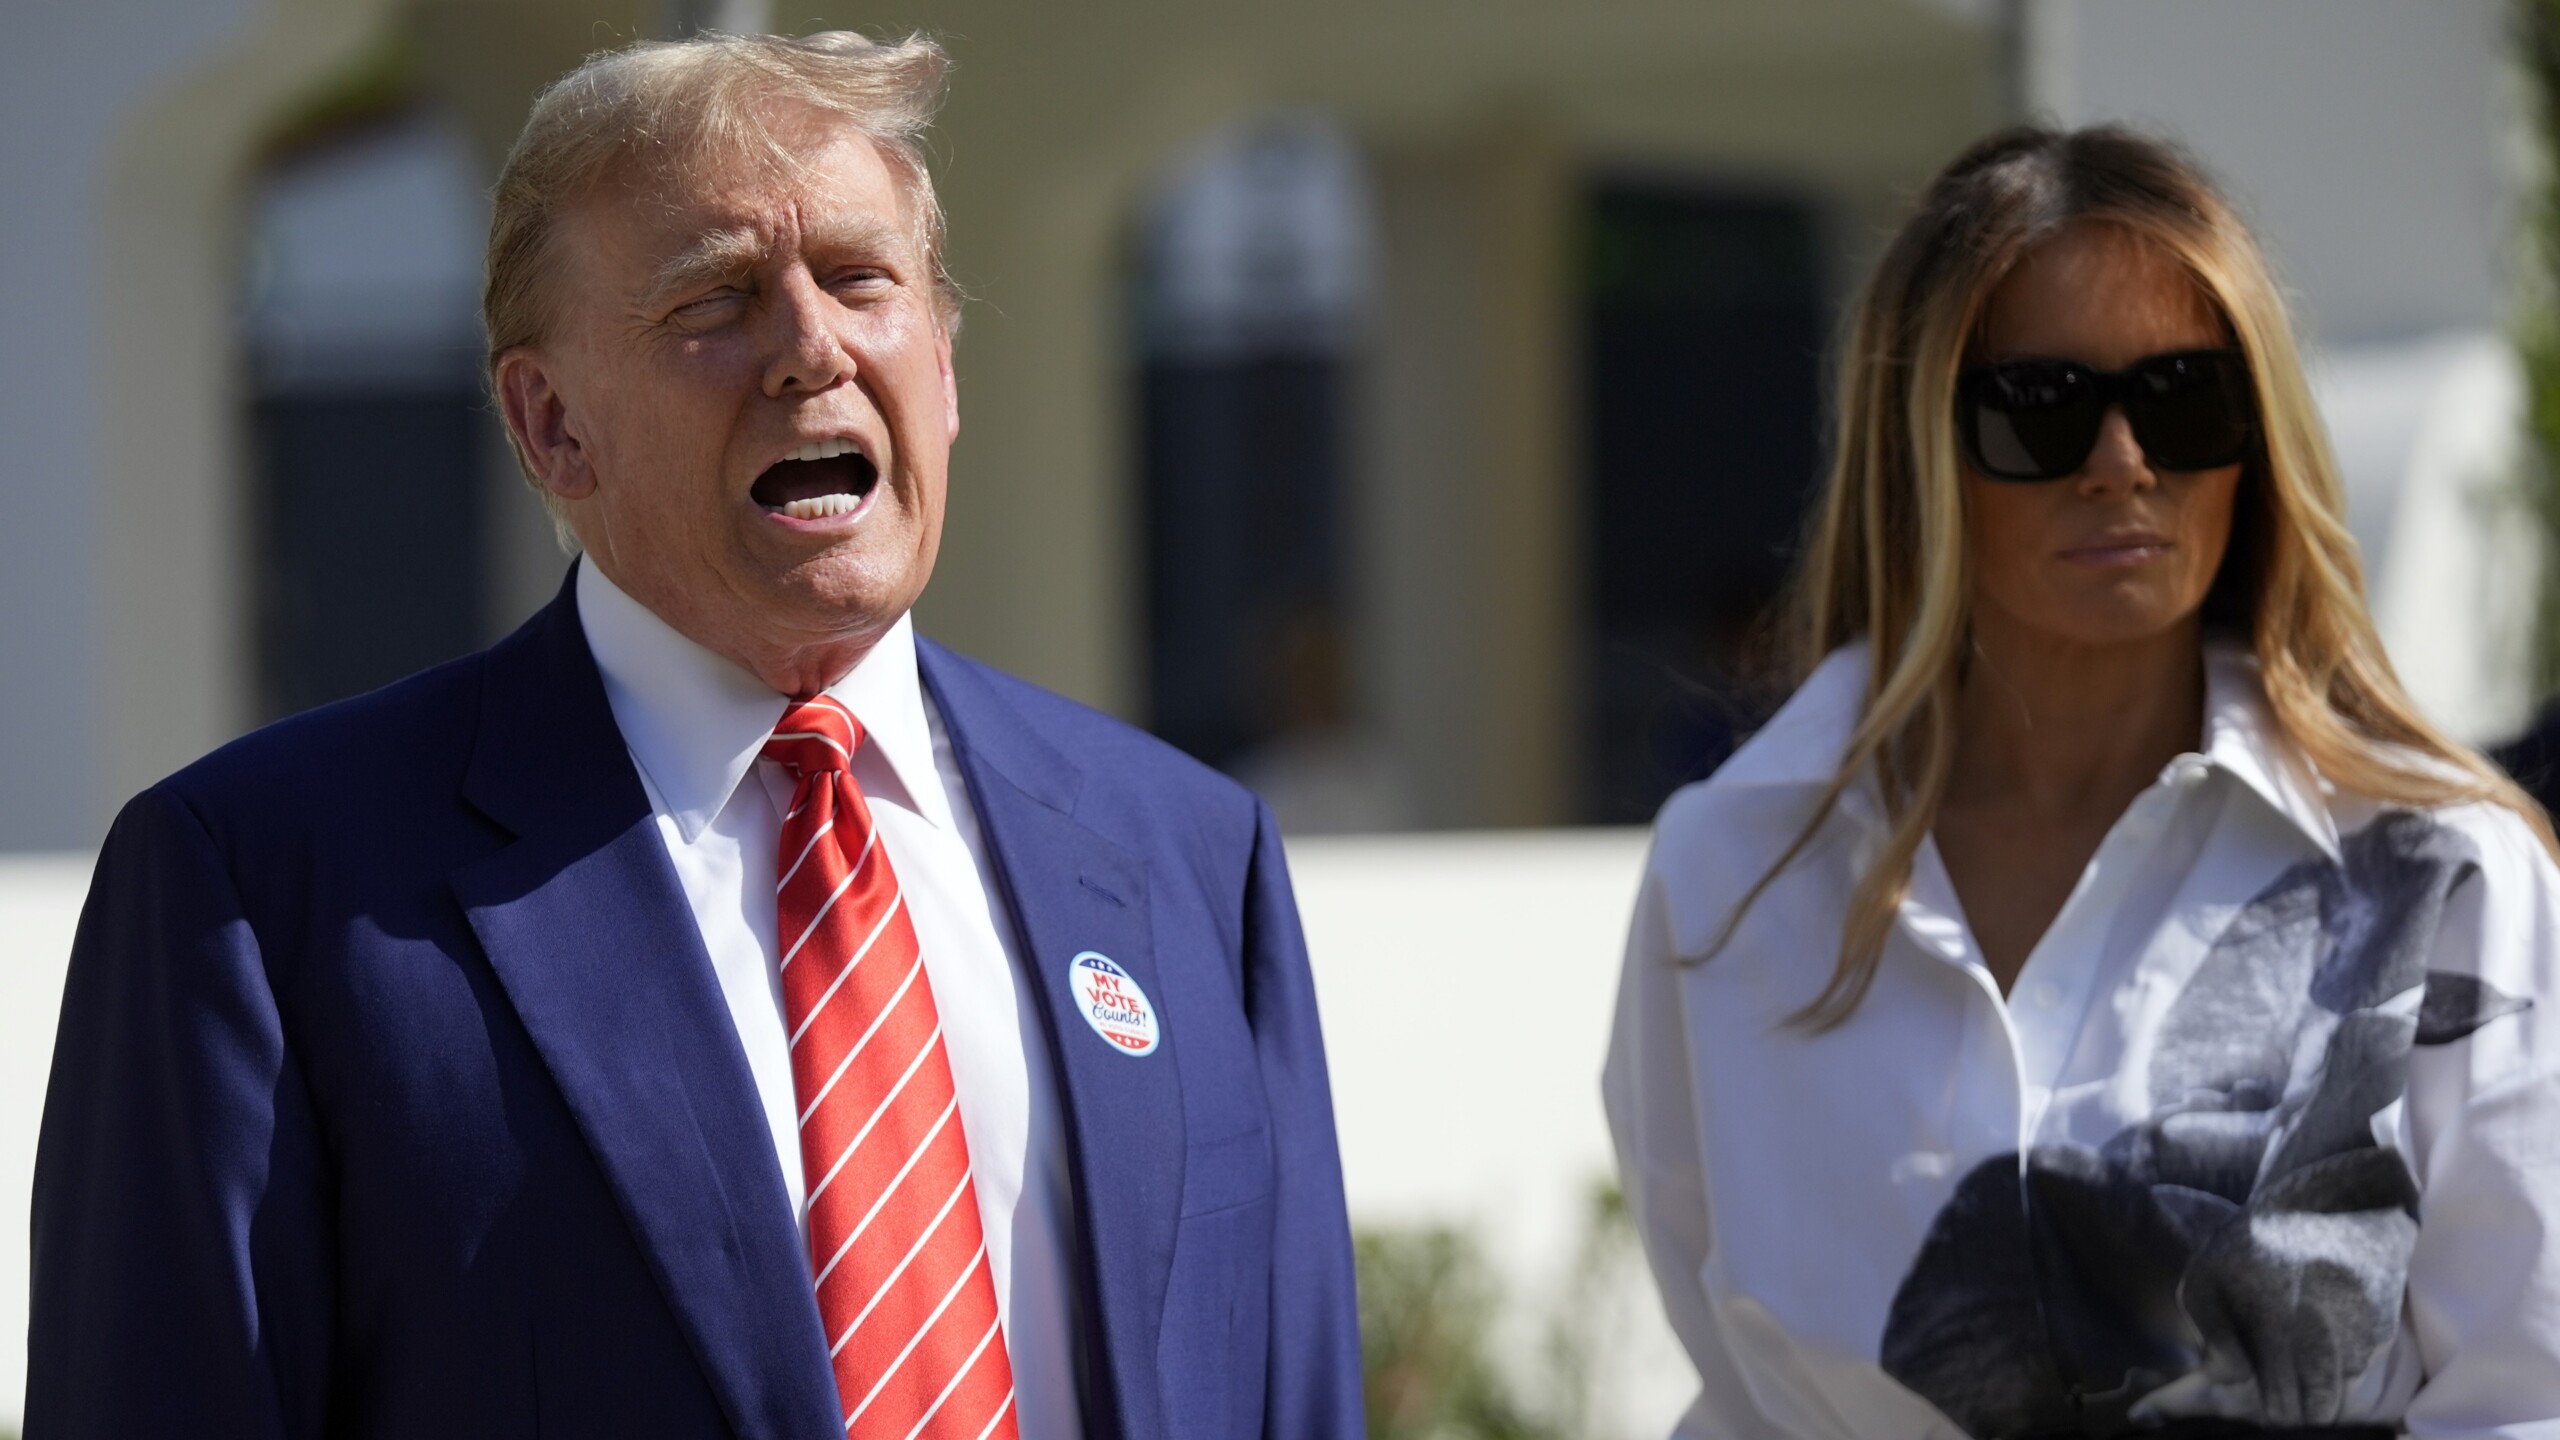 Former President Donald Trump and former first lady Melania Trump leave after voting in the Florida primary election in Palm Beach on Tuesday, March 19, 2024. | Wilfredo Lee, AP